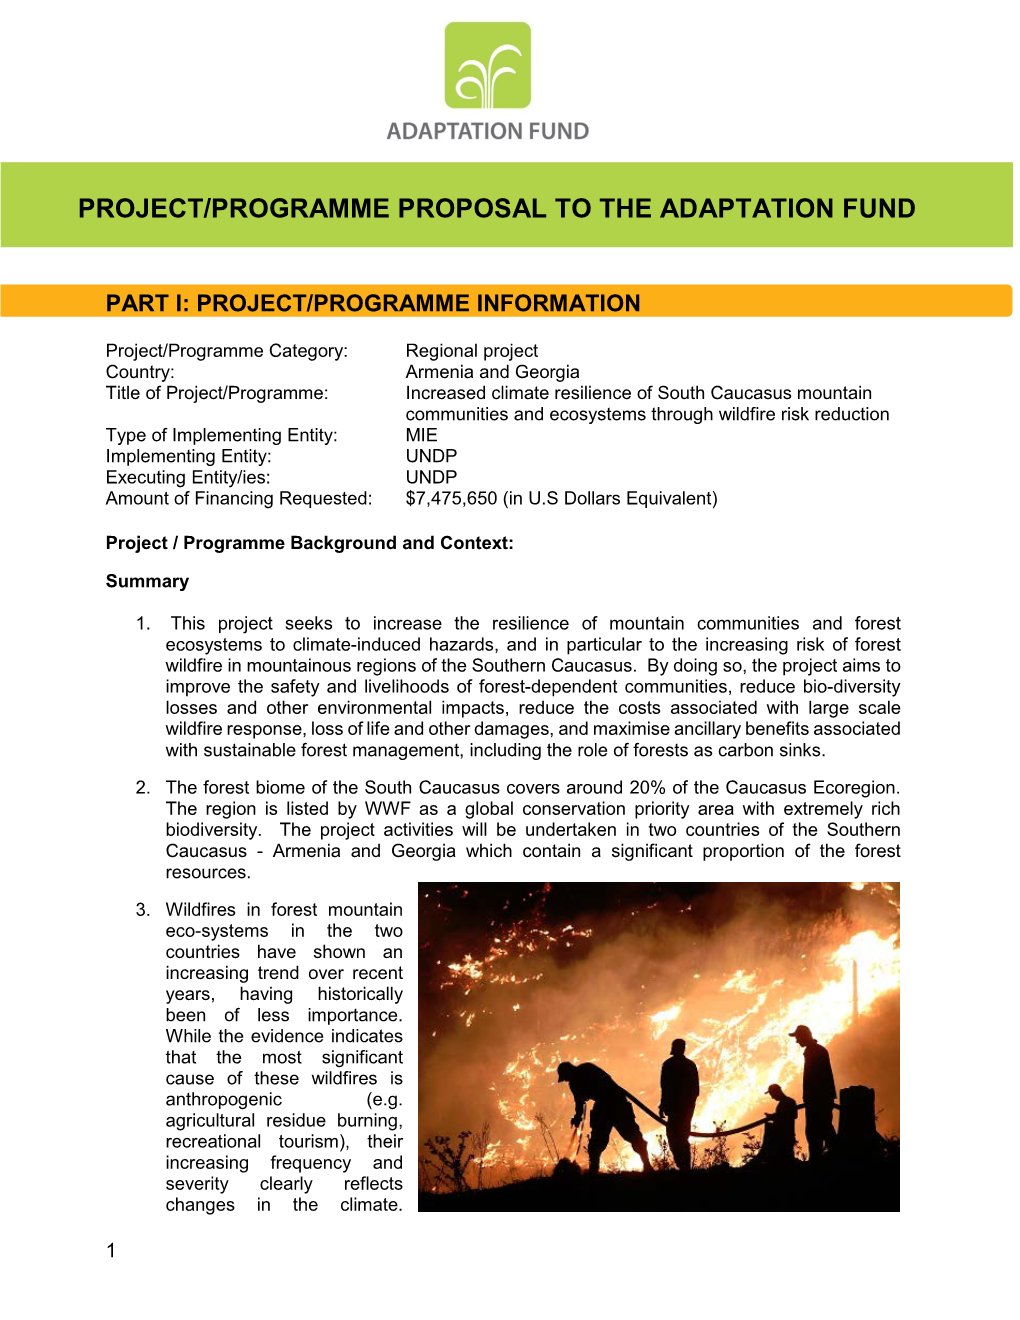 Project/Programme Proposal to the Adaptation Fund